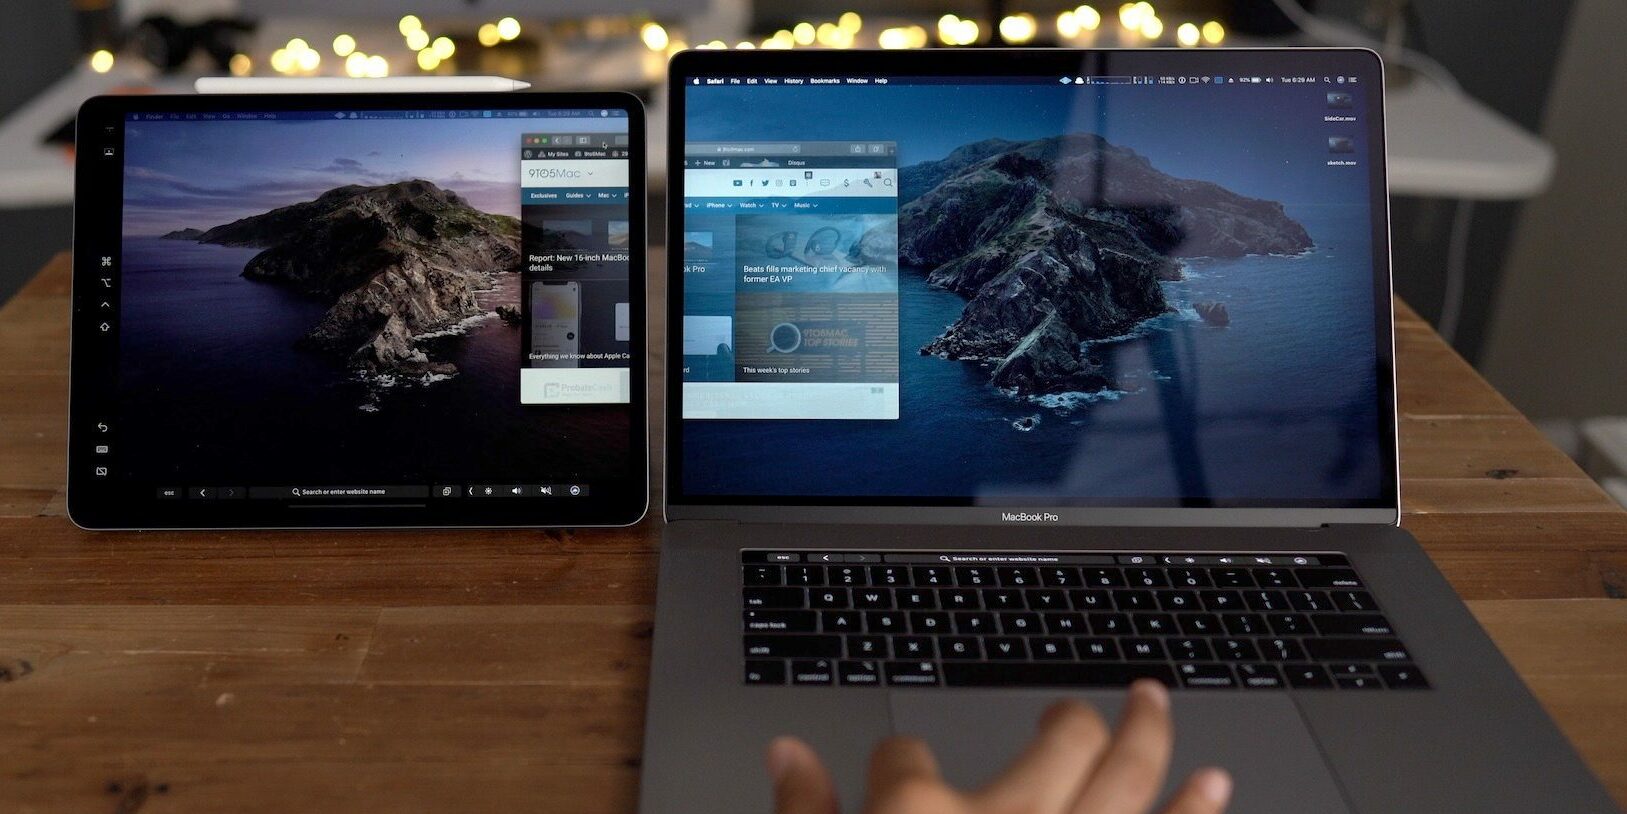 Macbook Mirroring to Your iPad issues Could Be